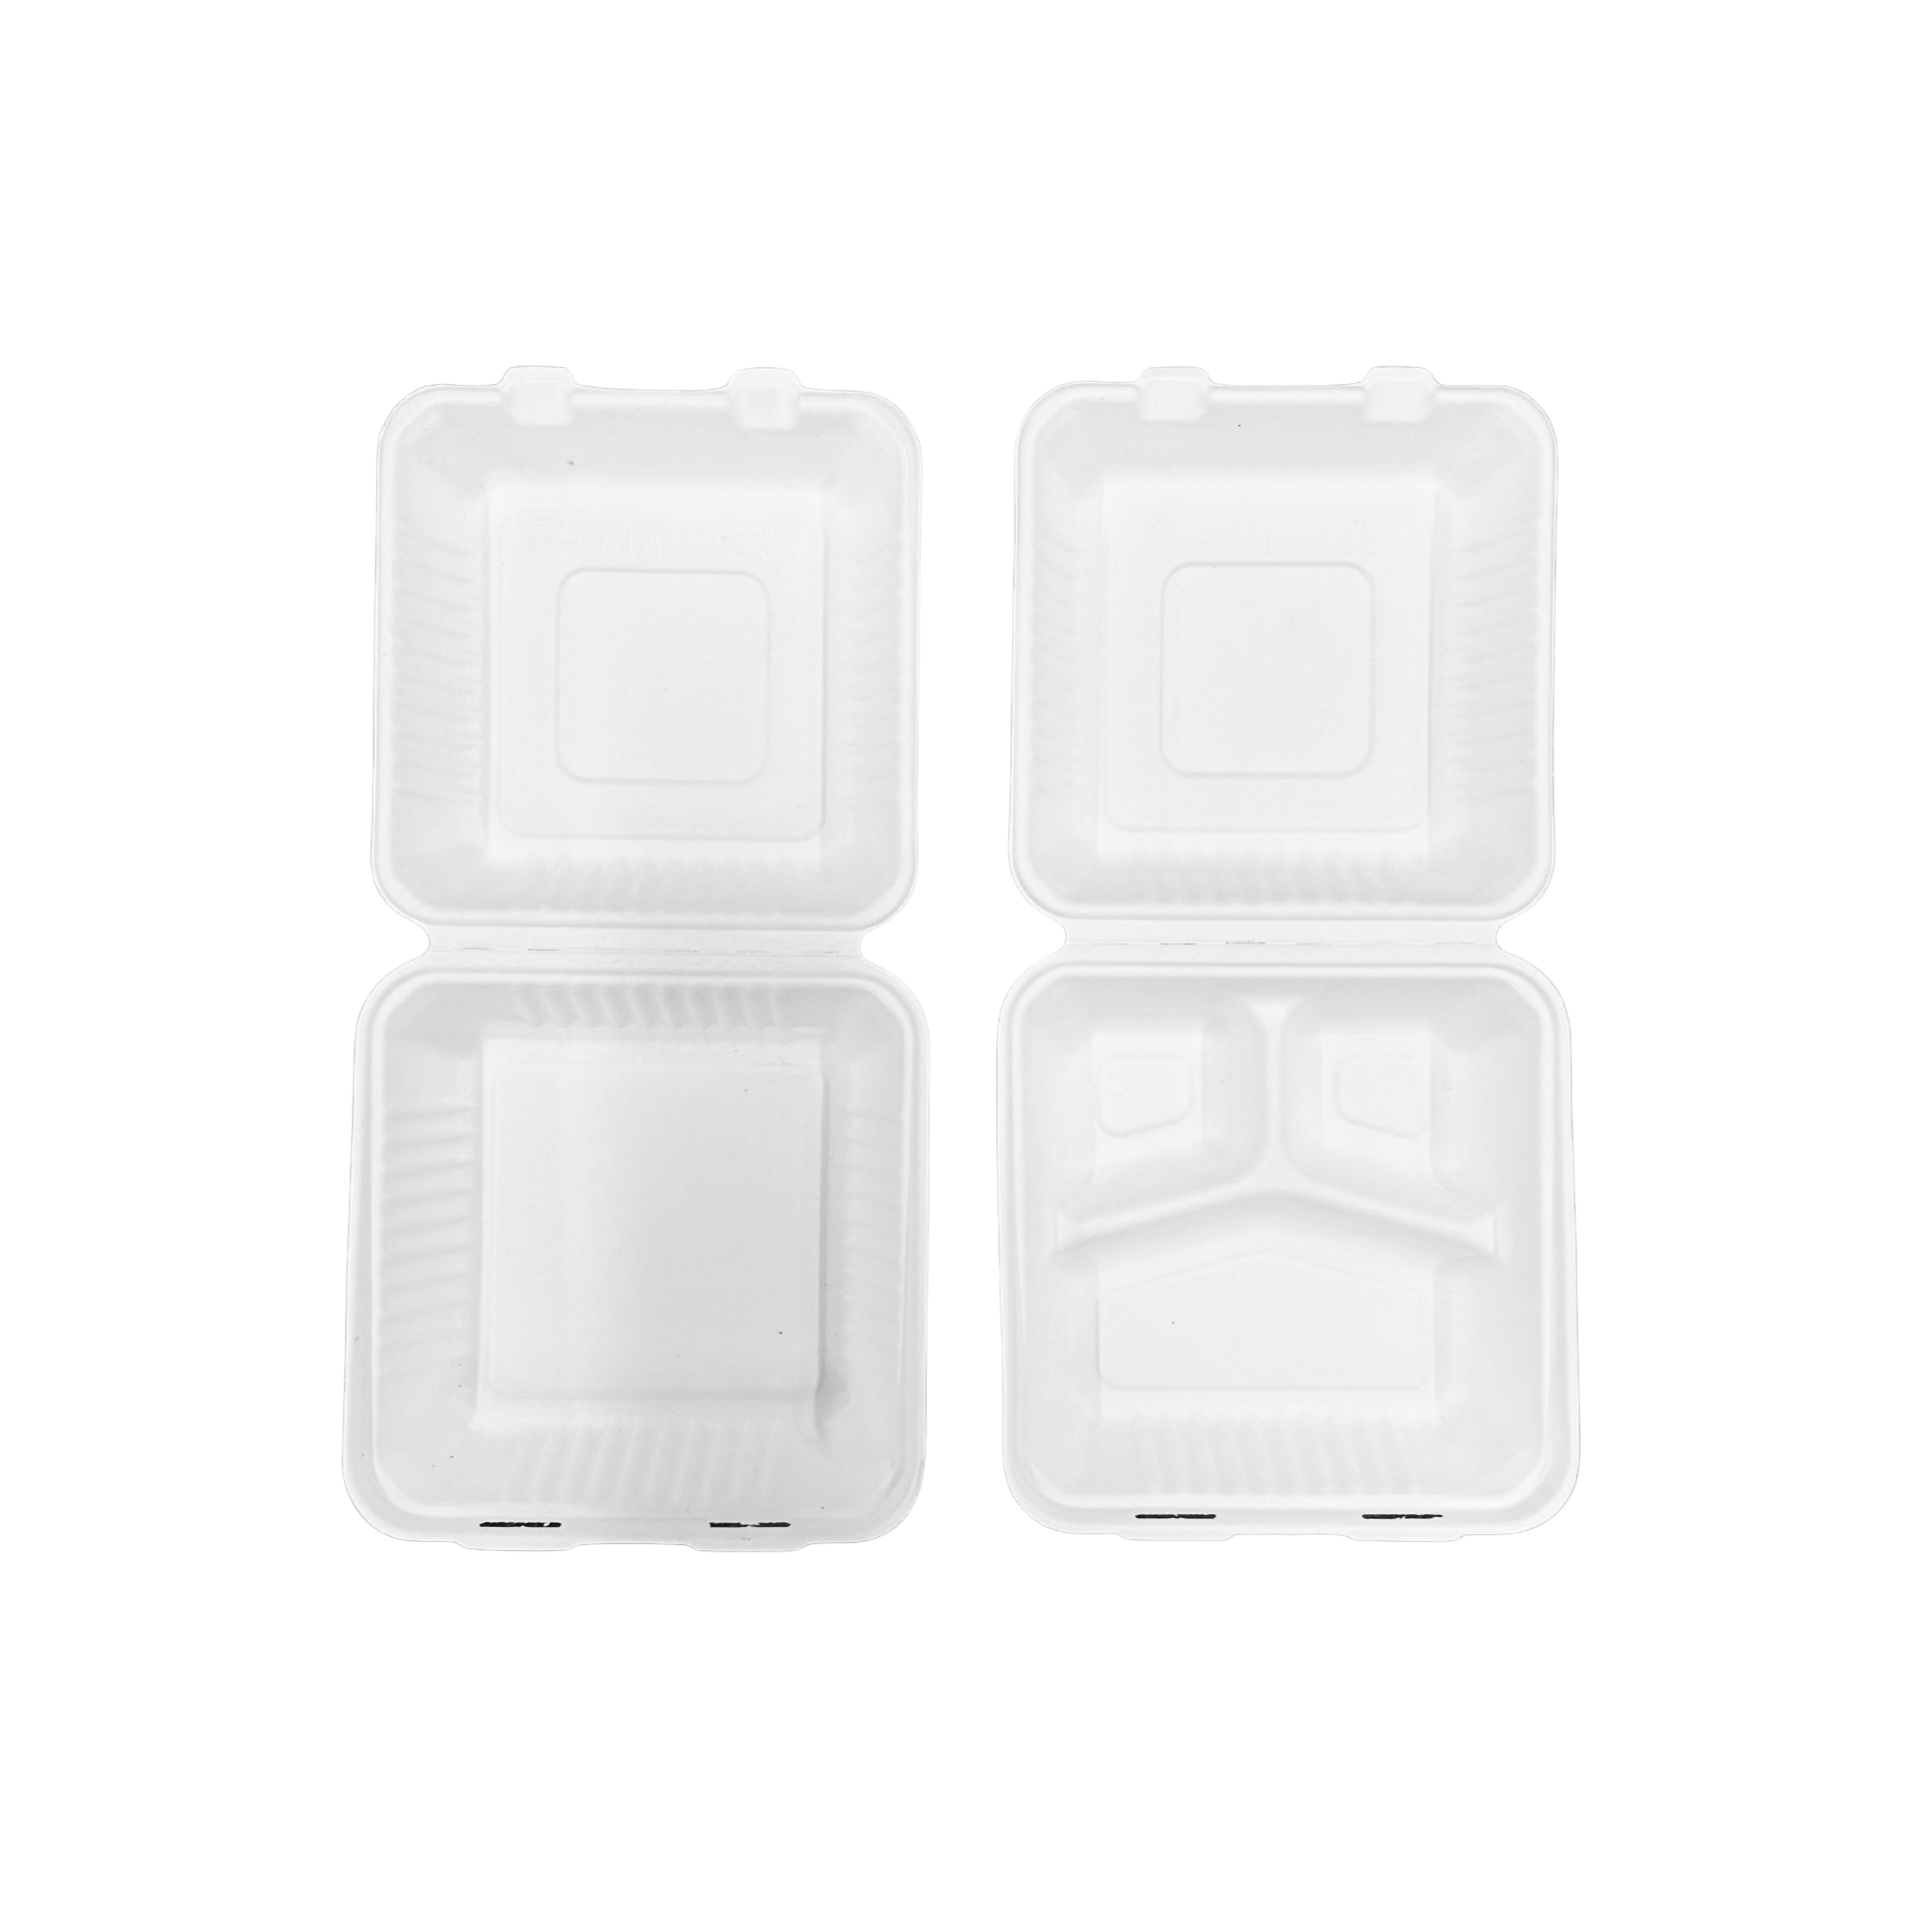 200 Pcs, 9x9x3'', 1-Compartment, Sugarcane Clamshell Food Container